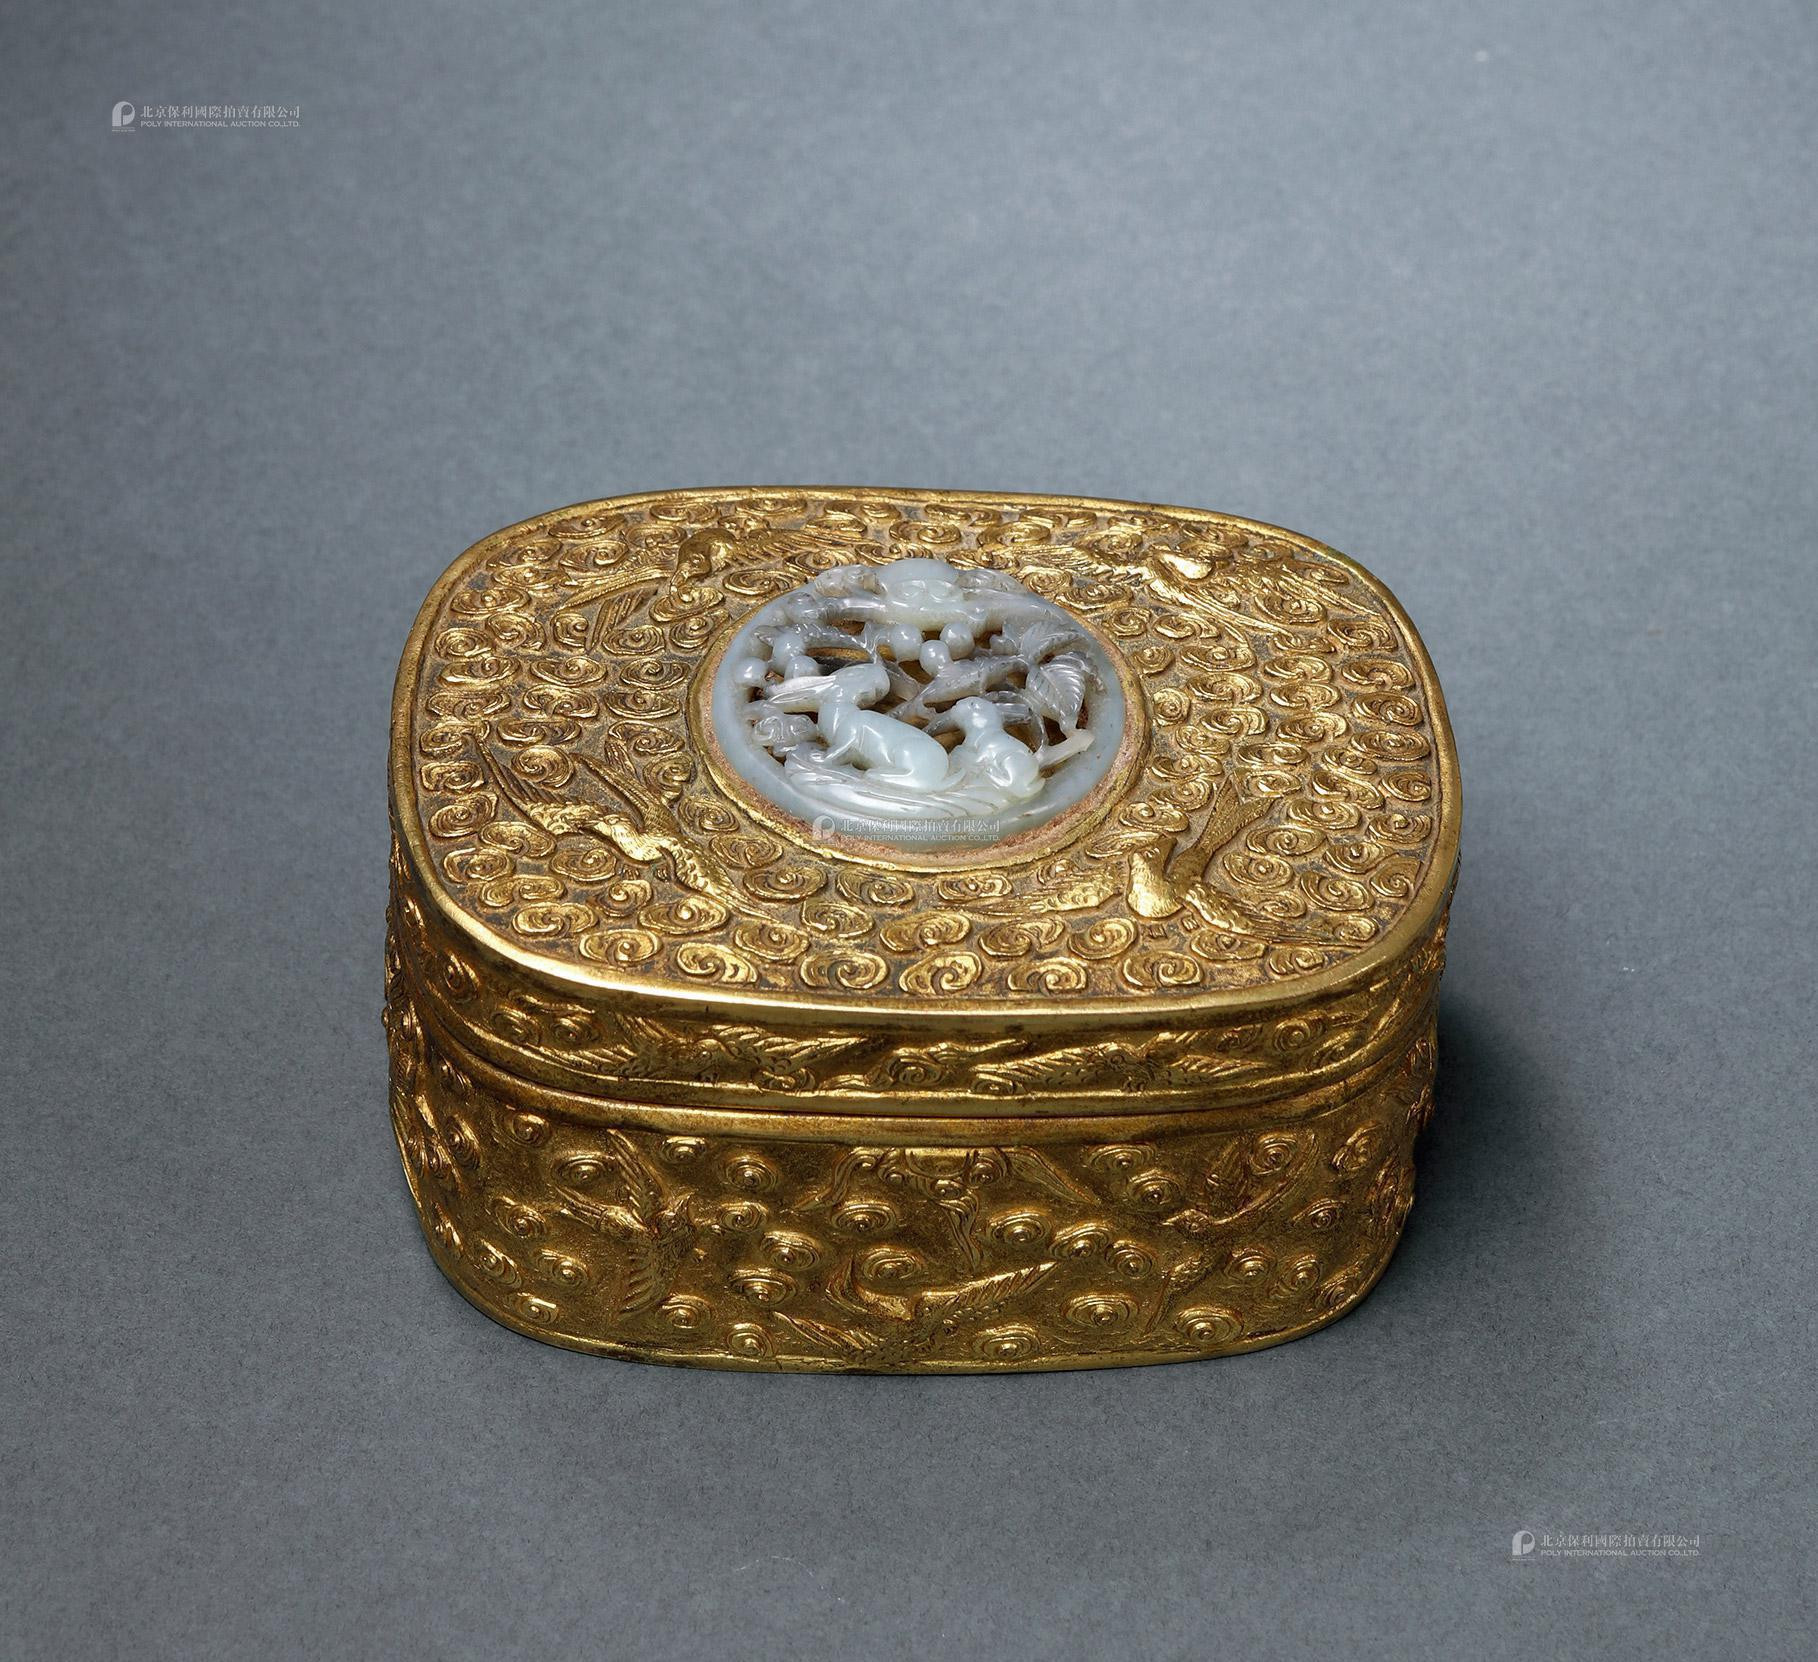 A GILT-BRONZE INLAID BOX WITH COVER